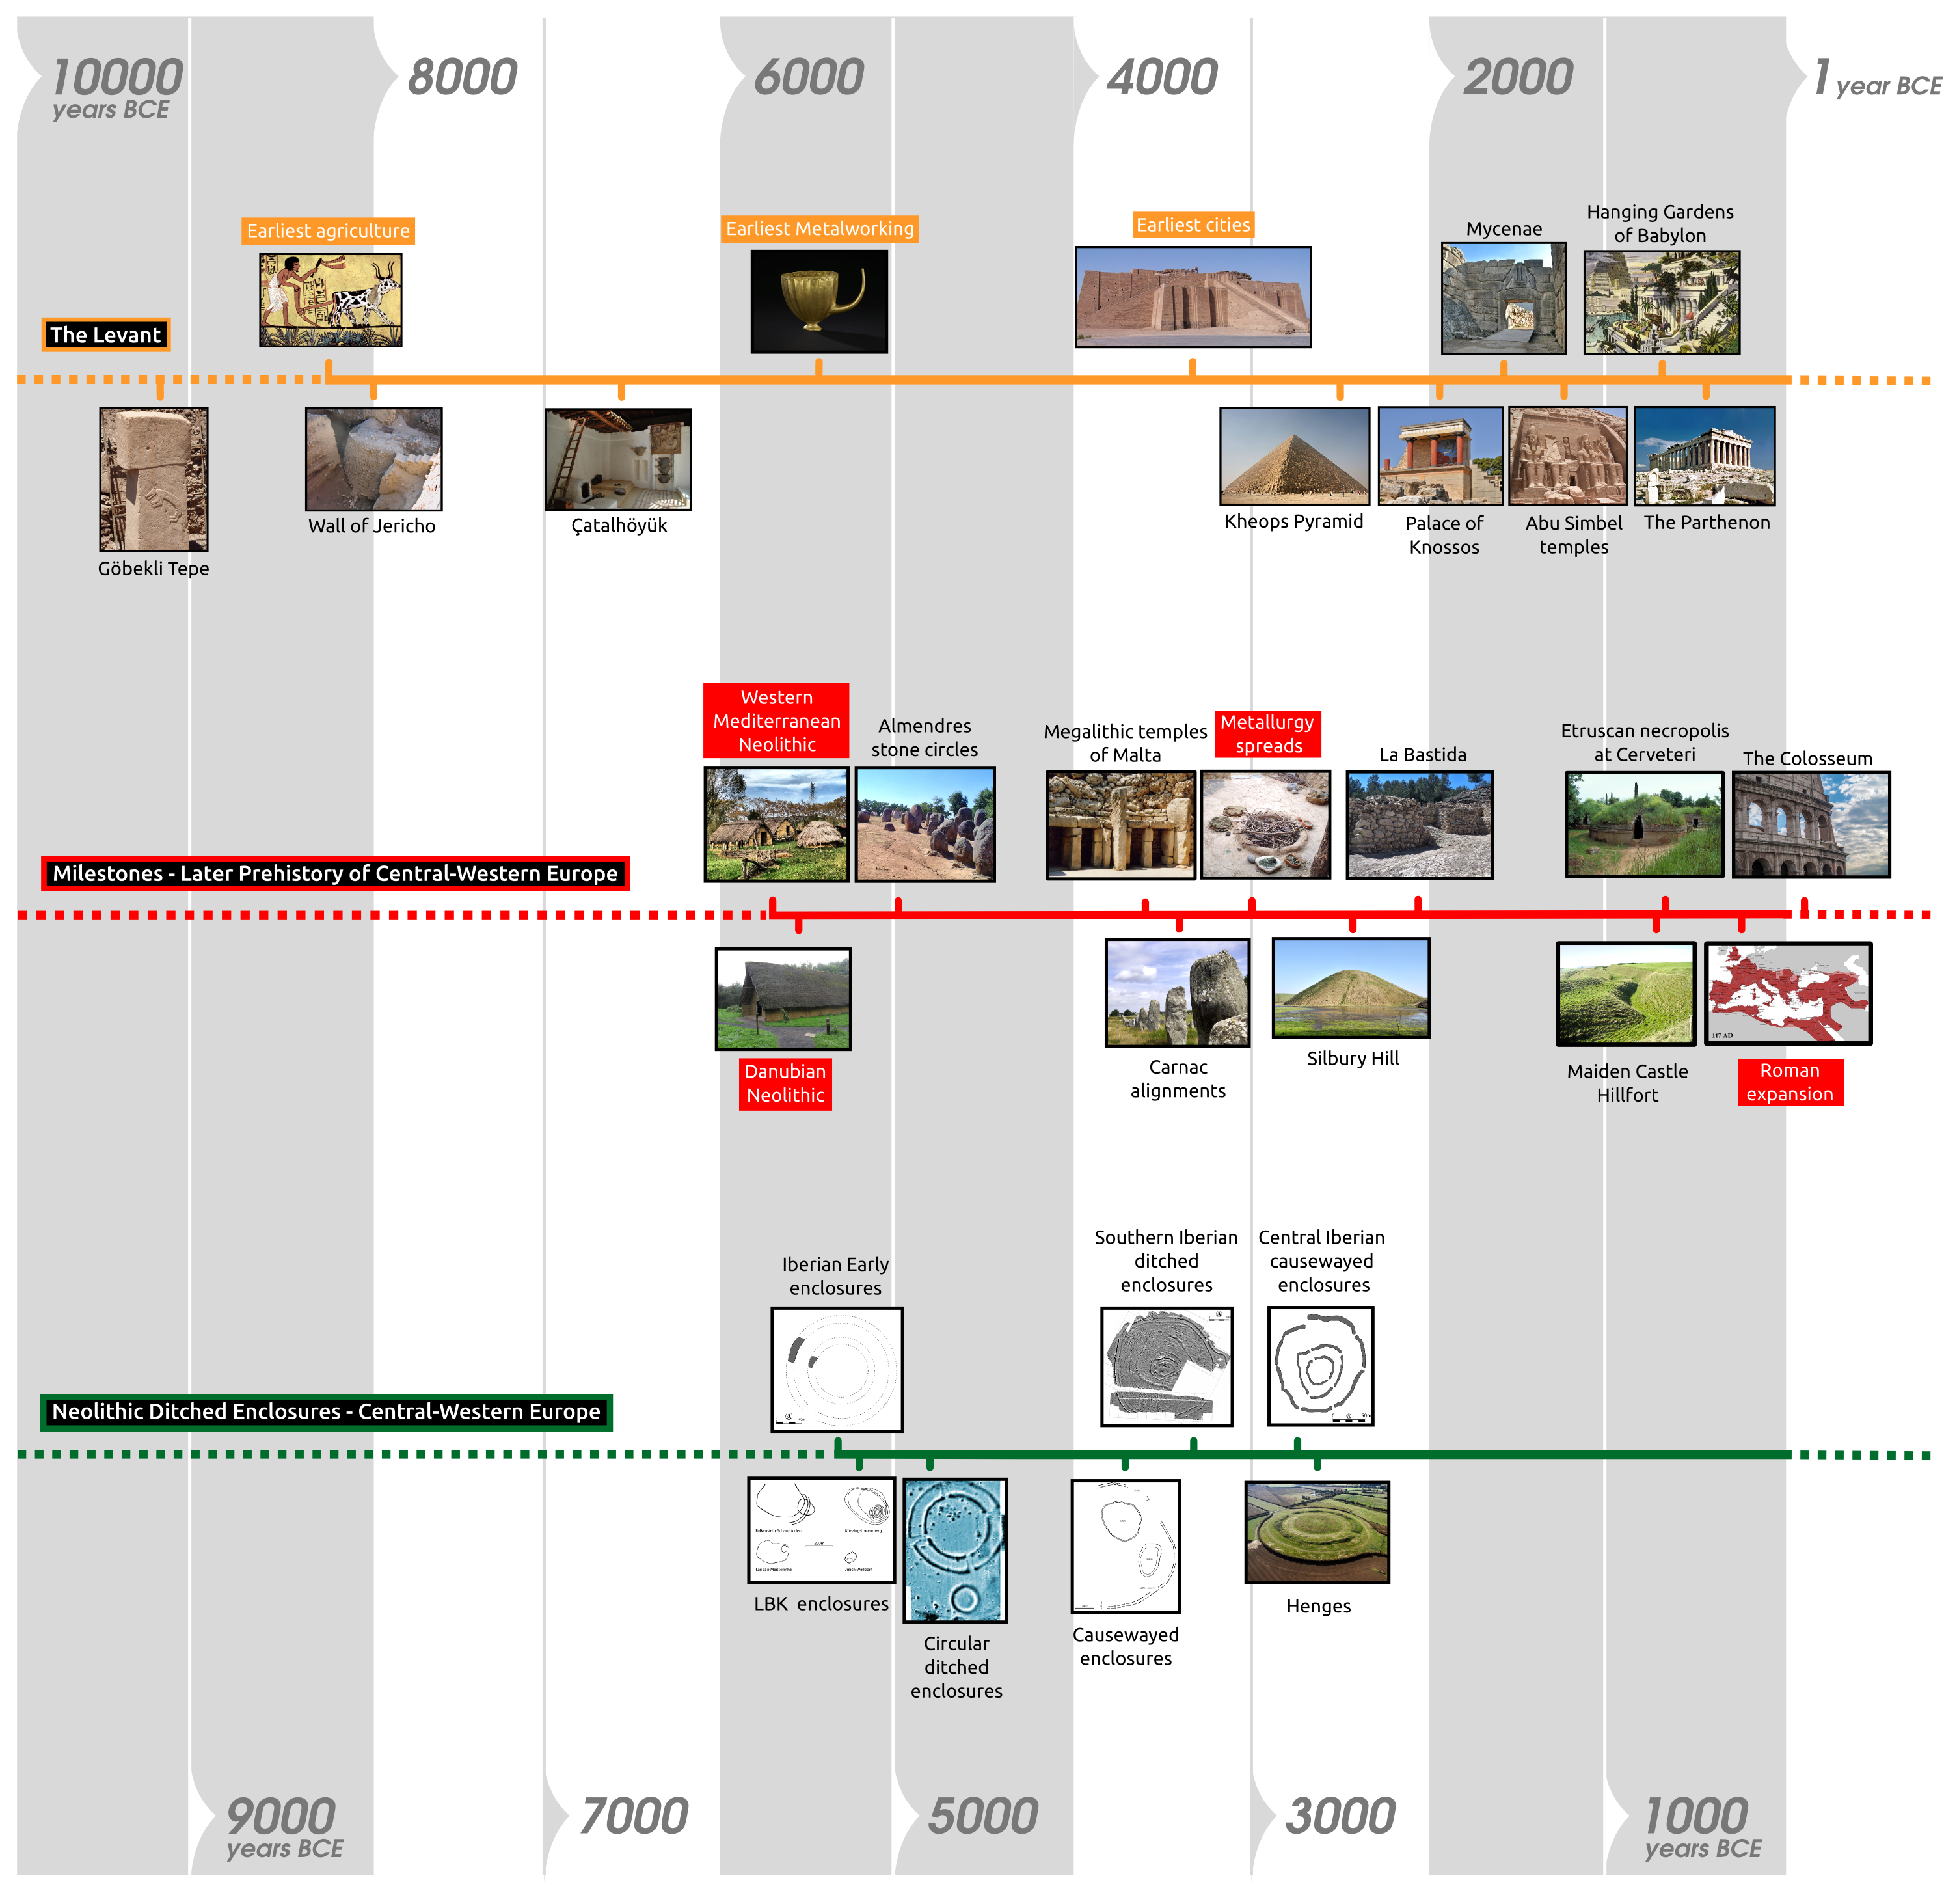 Timeline of Neolithic European ditched enclosures. The diagram describes several milestones in the development of this phenomenon. It also shows how they compare in terms of chronology with well-known architectural elements in Europe and the Near East.